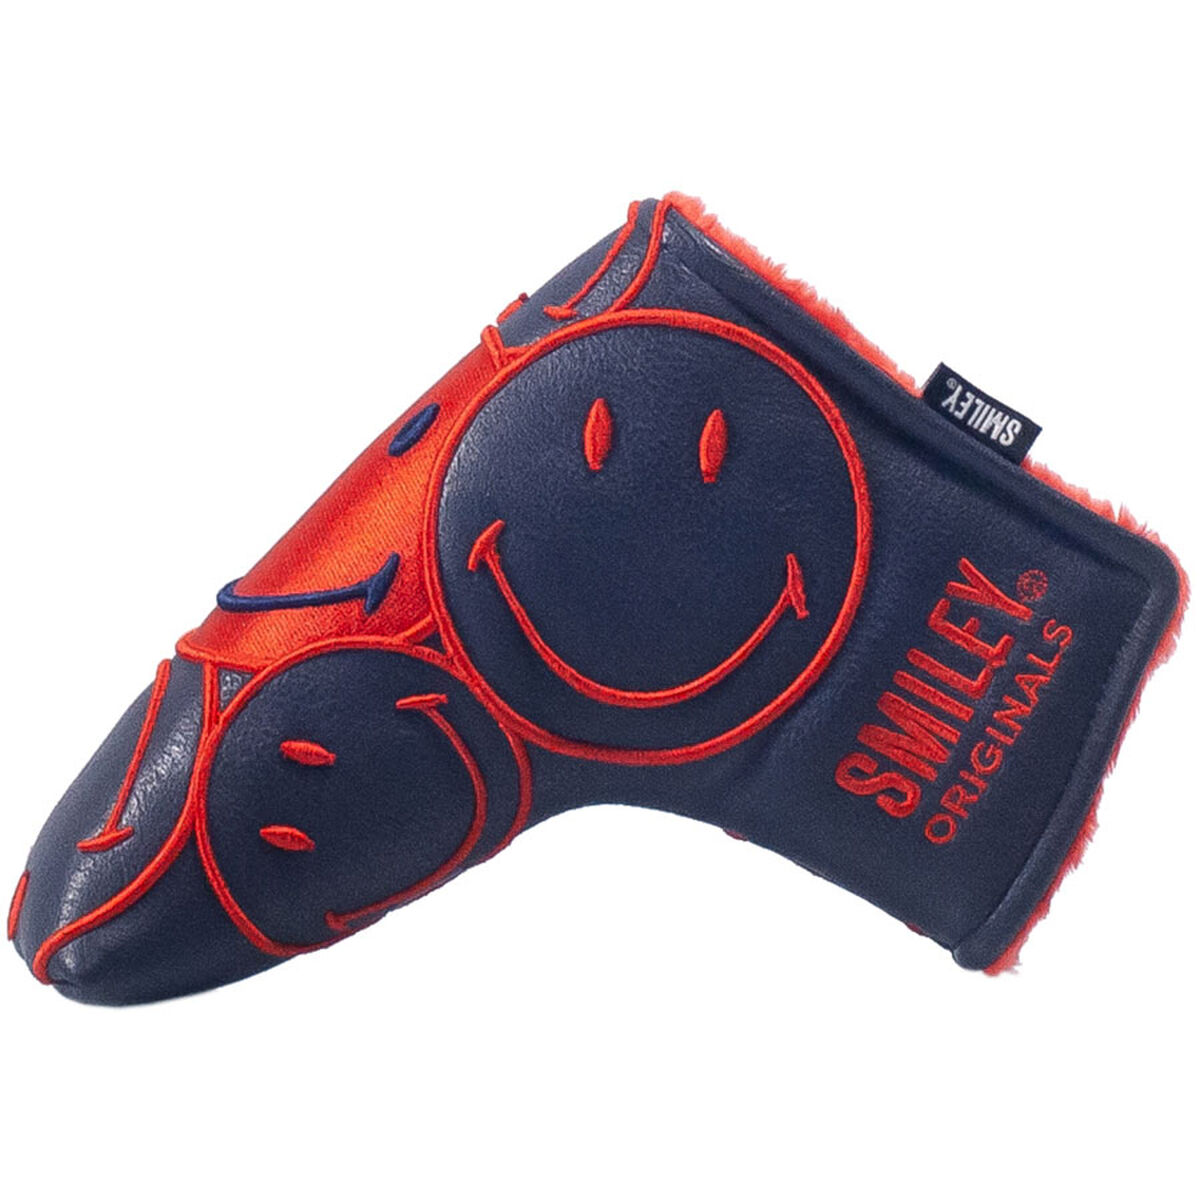 Smiley Original Stacked Blade Golf Putter Head Cover, Mens, Blade, Navy/red | American Golf